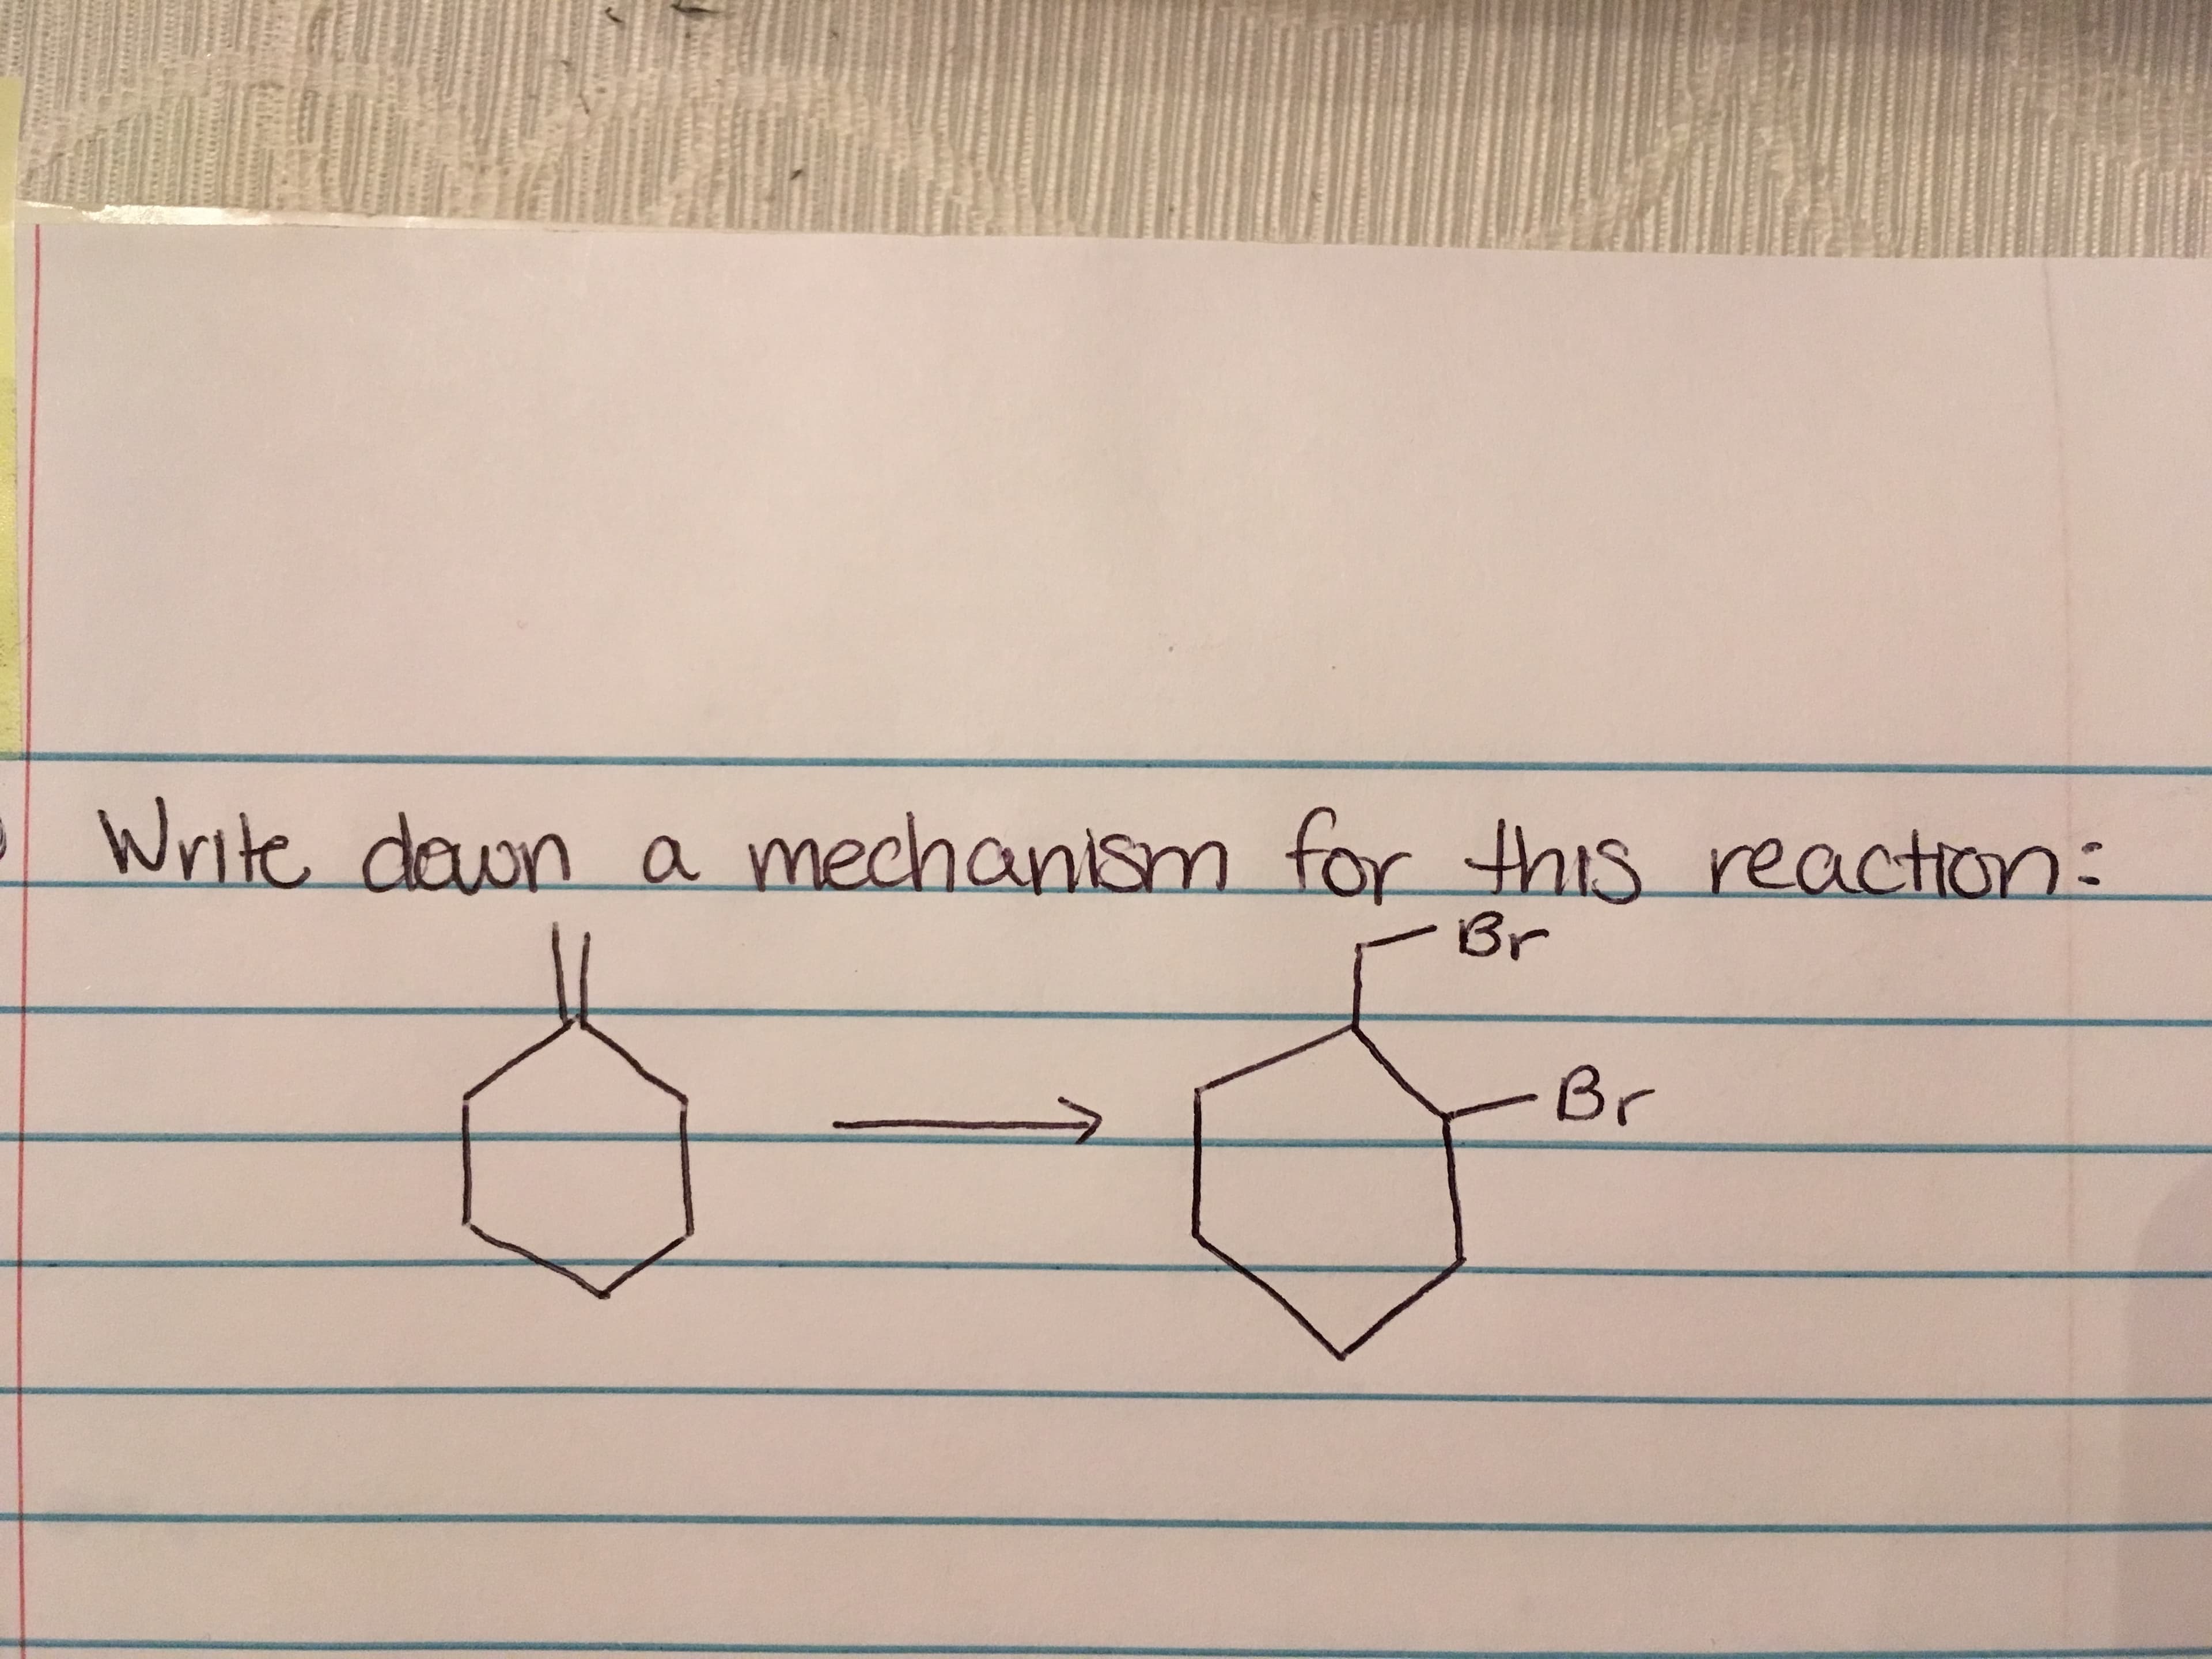 Write down a mechanism for this reaction:
Br
Br
